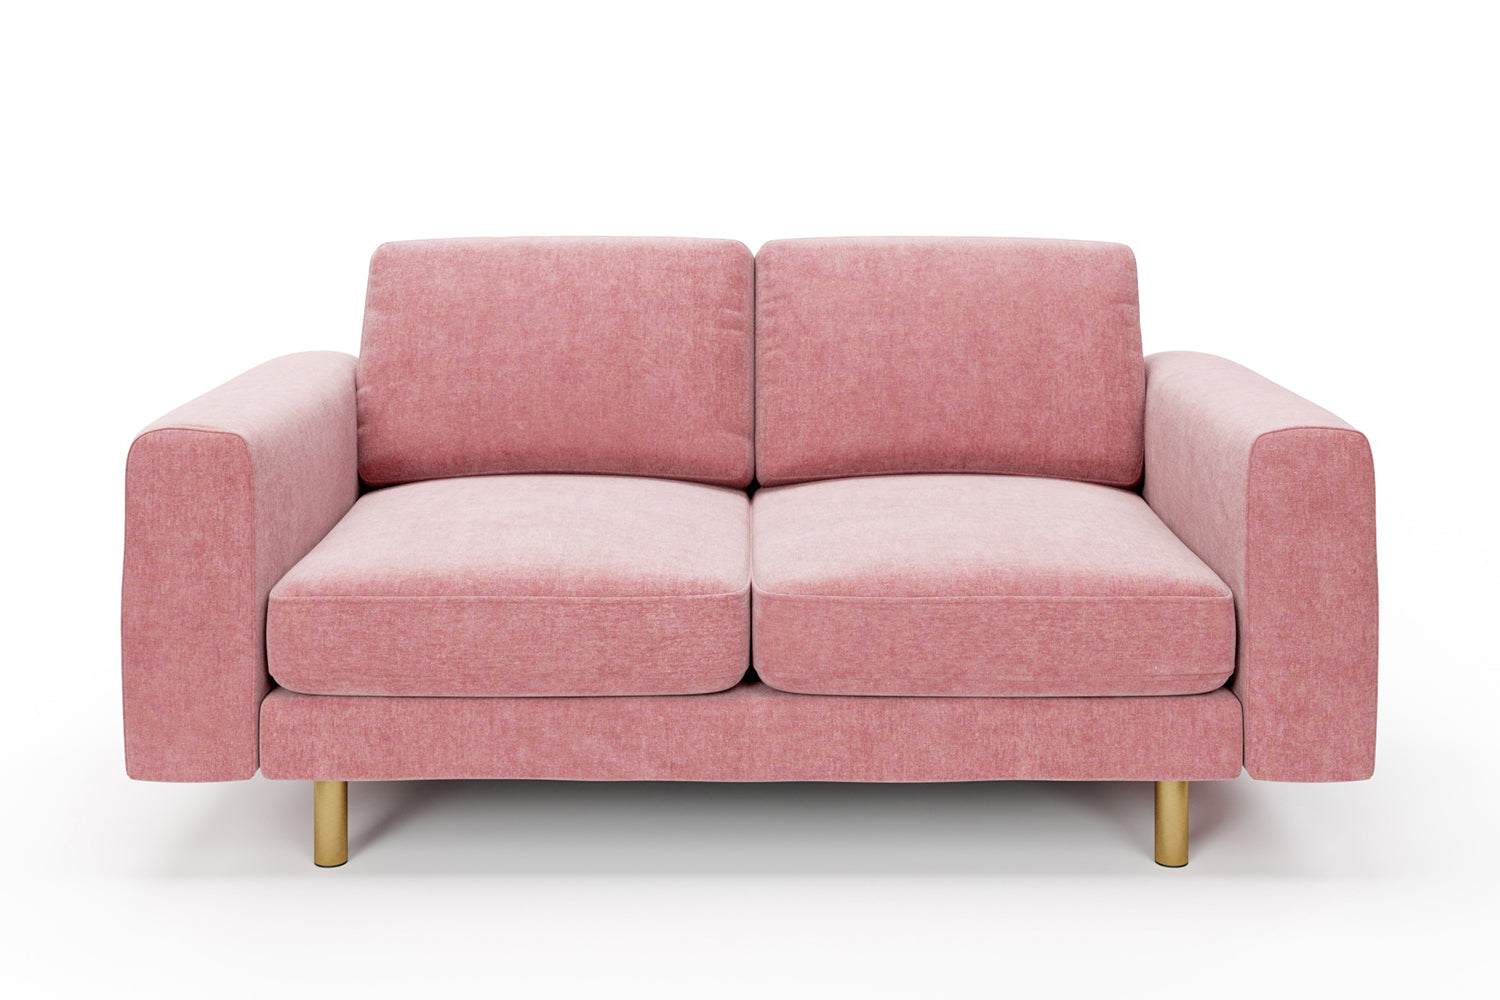 SNUG | The Big Chill 2 Seater Sofa in Blush Coral variant_40414876860464